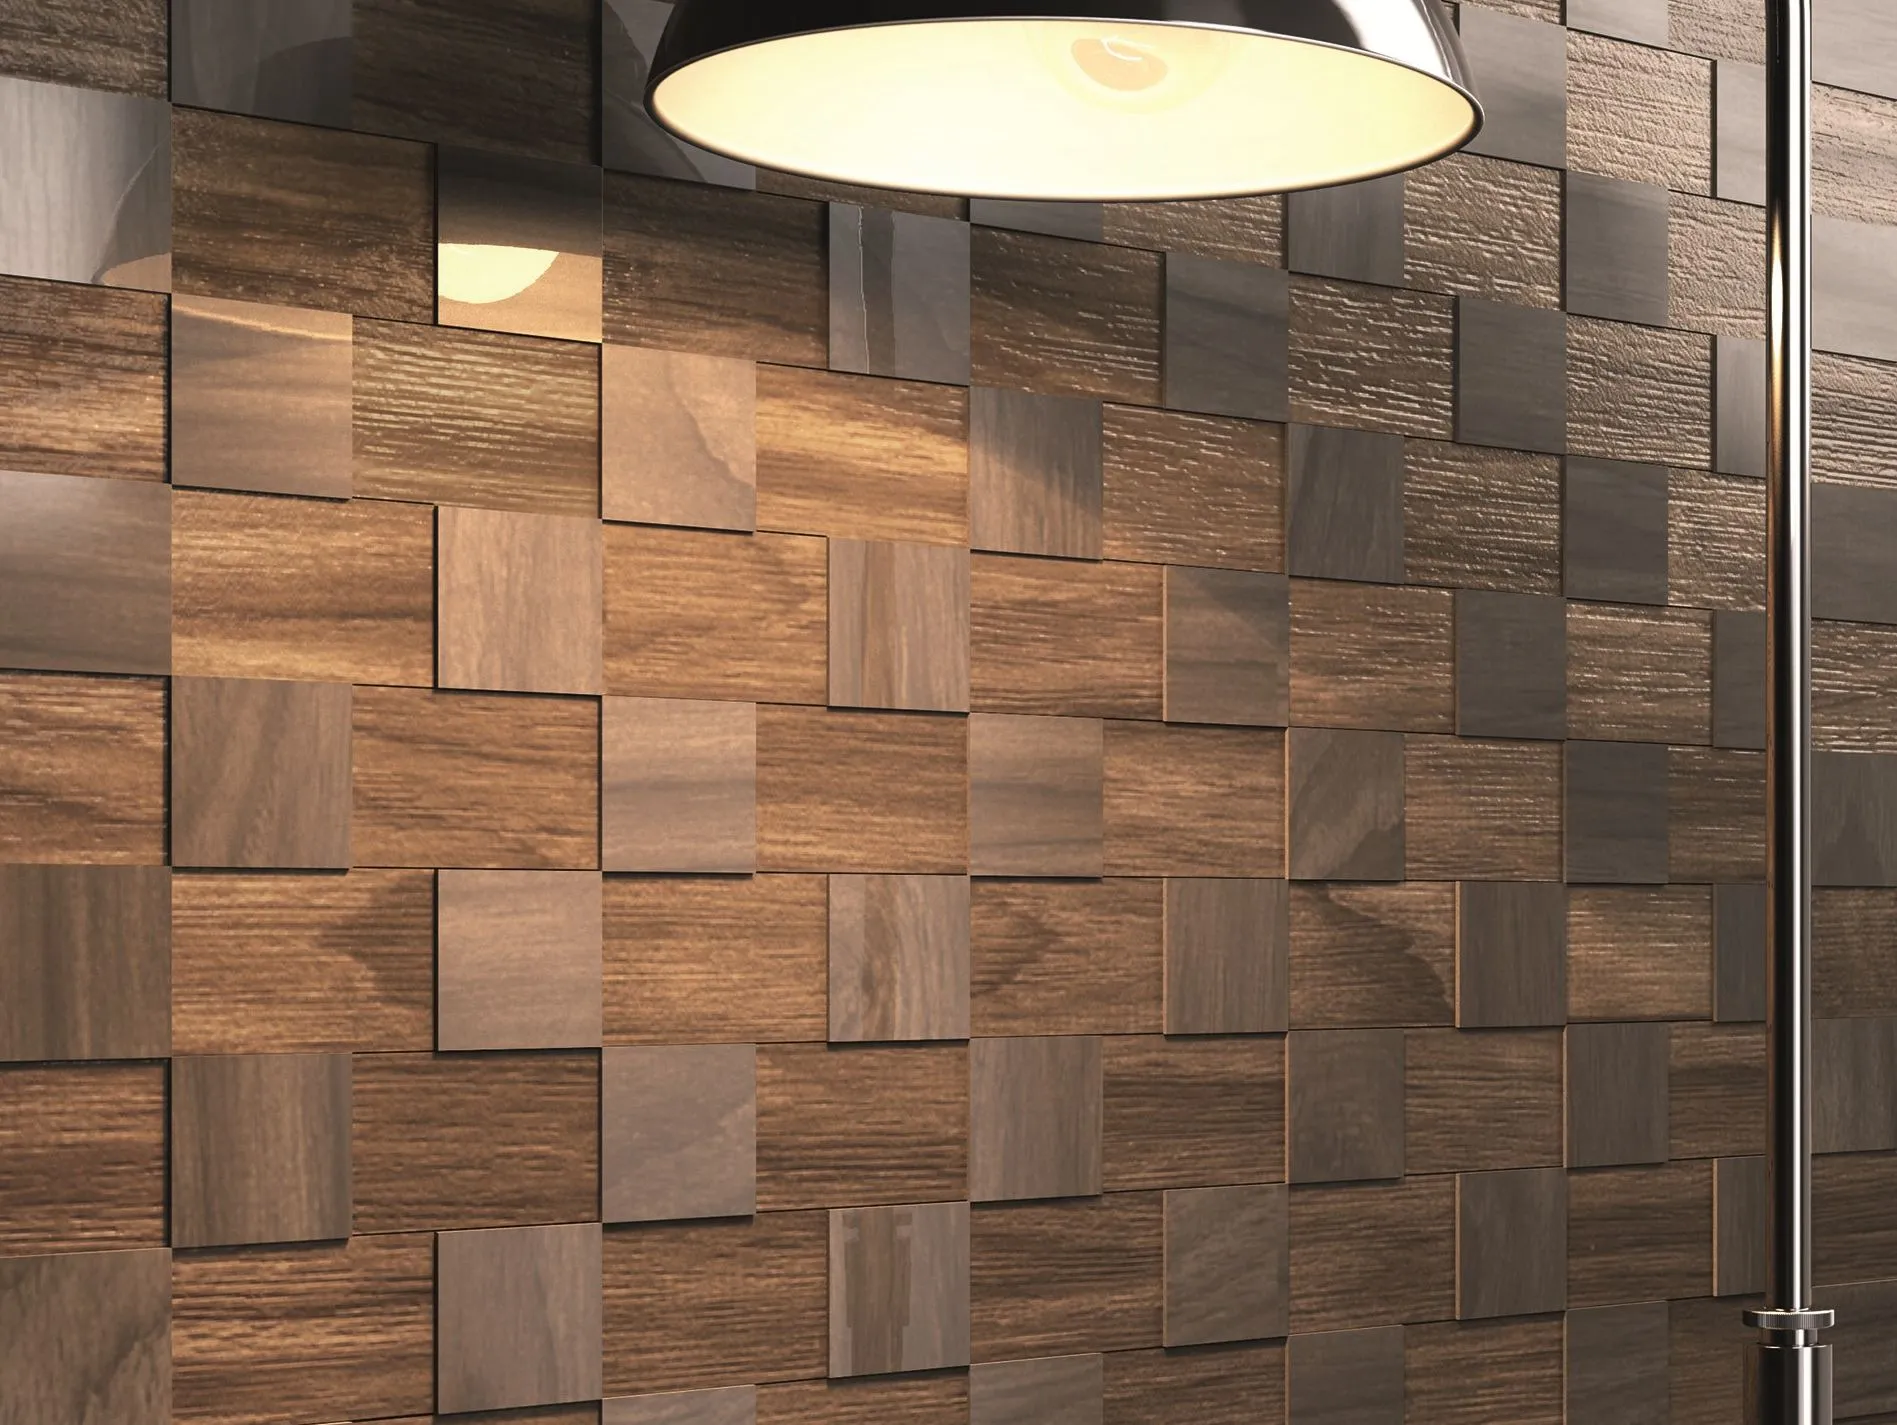 Contemporary Dark Wood Wall Covering Near Standing Lamp on Homesfeed